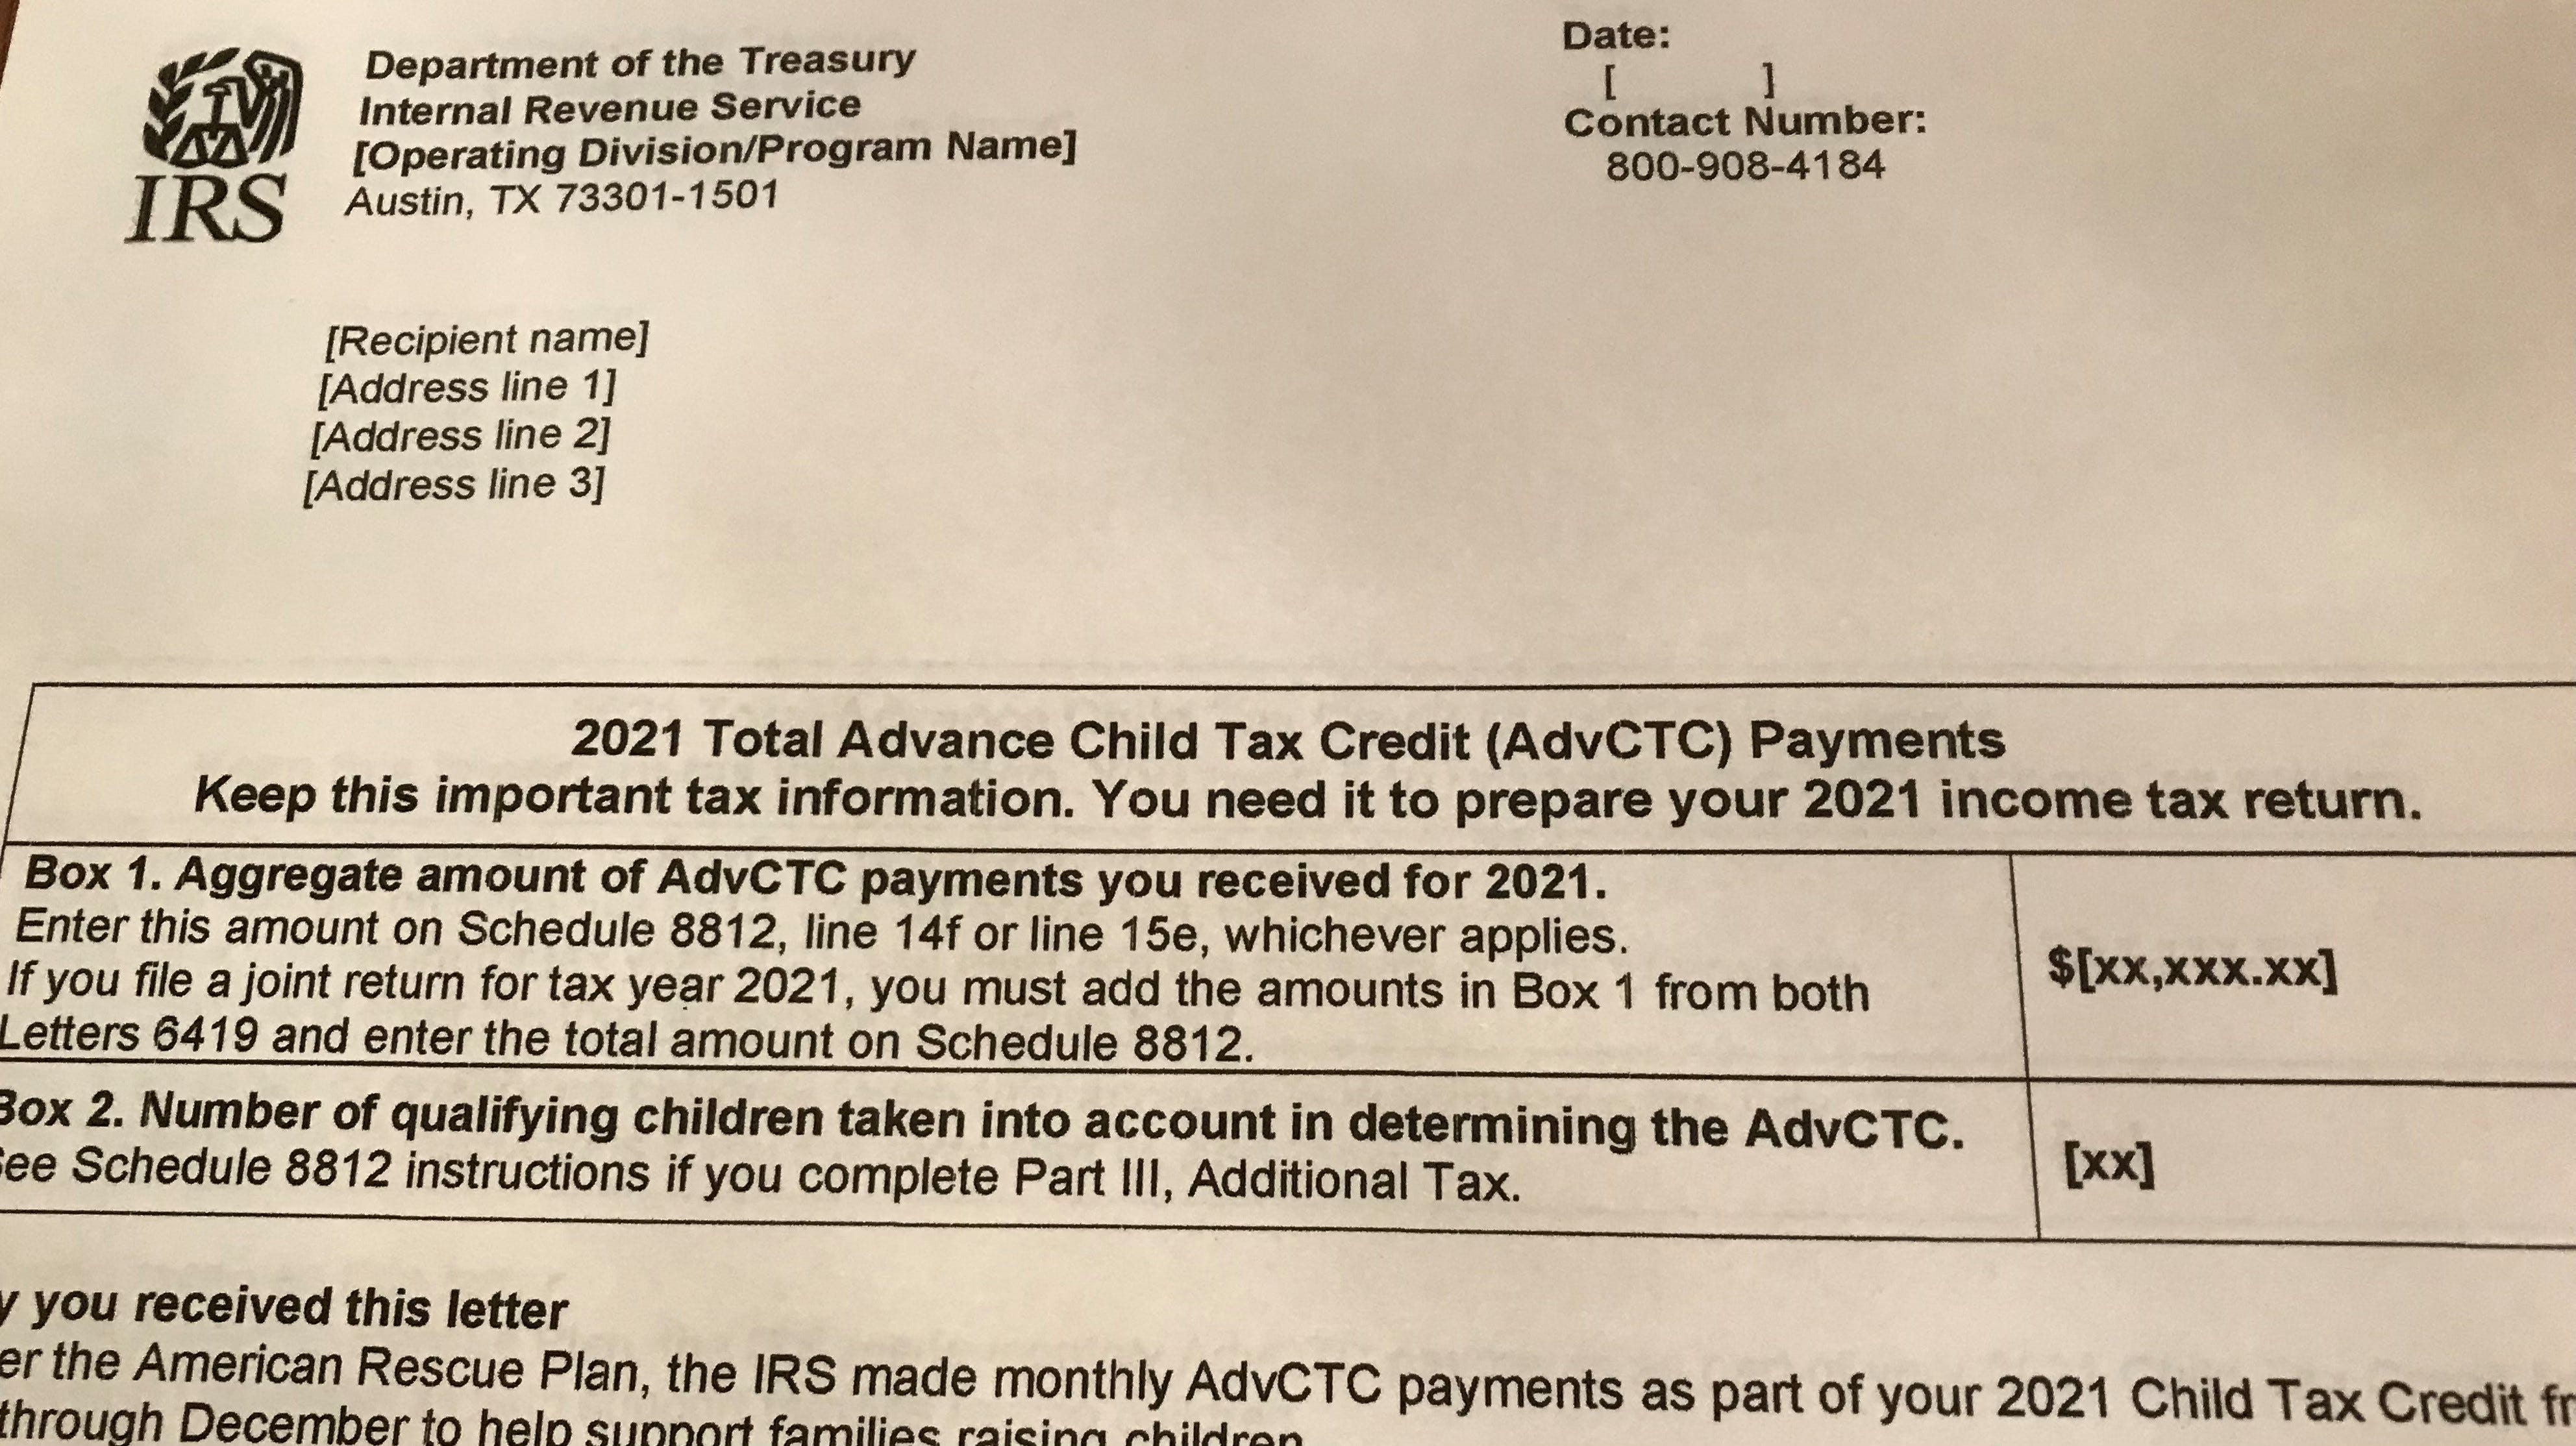 The IRS is sending a letter that has two boxes, including Box 1 that lists the total amount of money received for the advance child tax credit payments in 2021. A married couple who files a joint return will receive two letters, and needs to refer to them when completing a tax return.